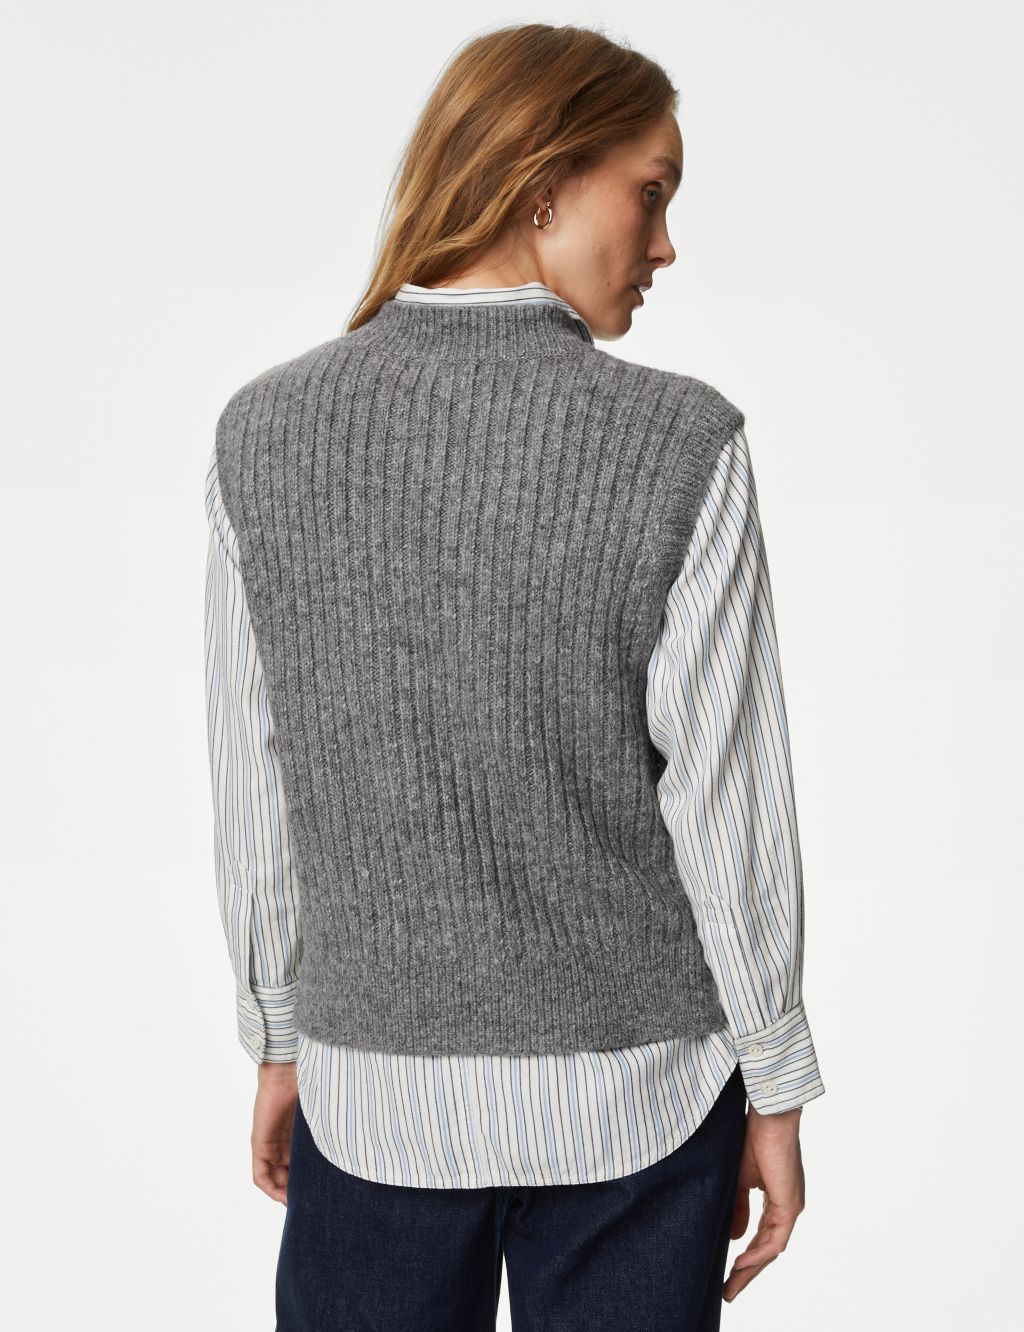 Textured Knitted Vest with Wool image 5